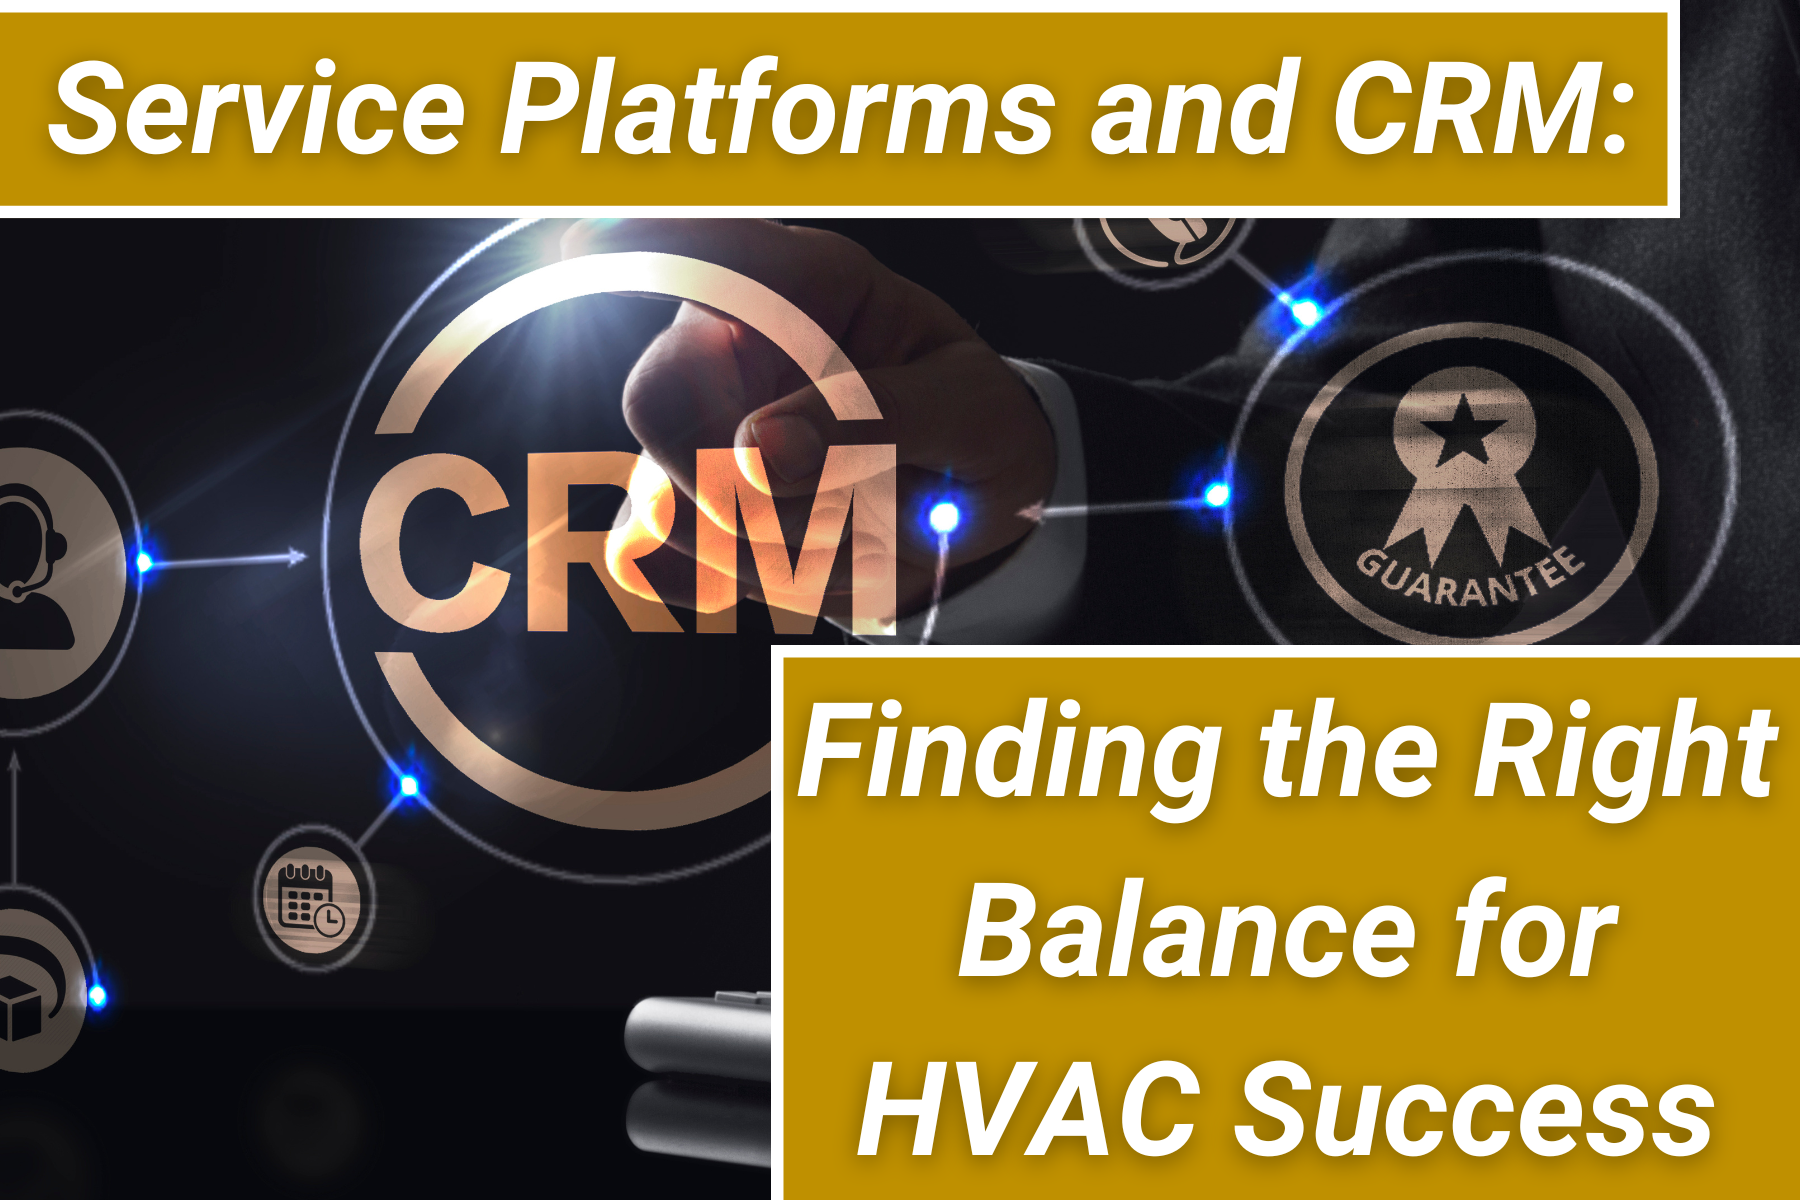 Service Platforms and CRM: Finding the Right Balance for HVAC Success